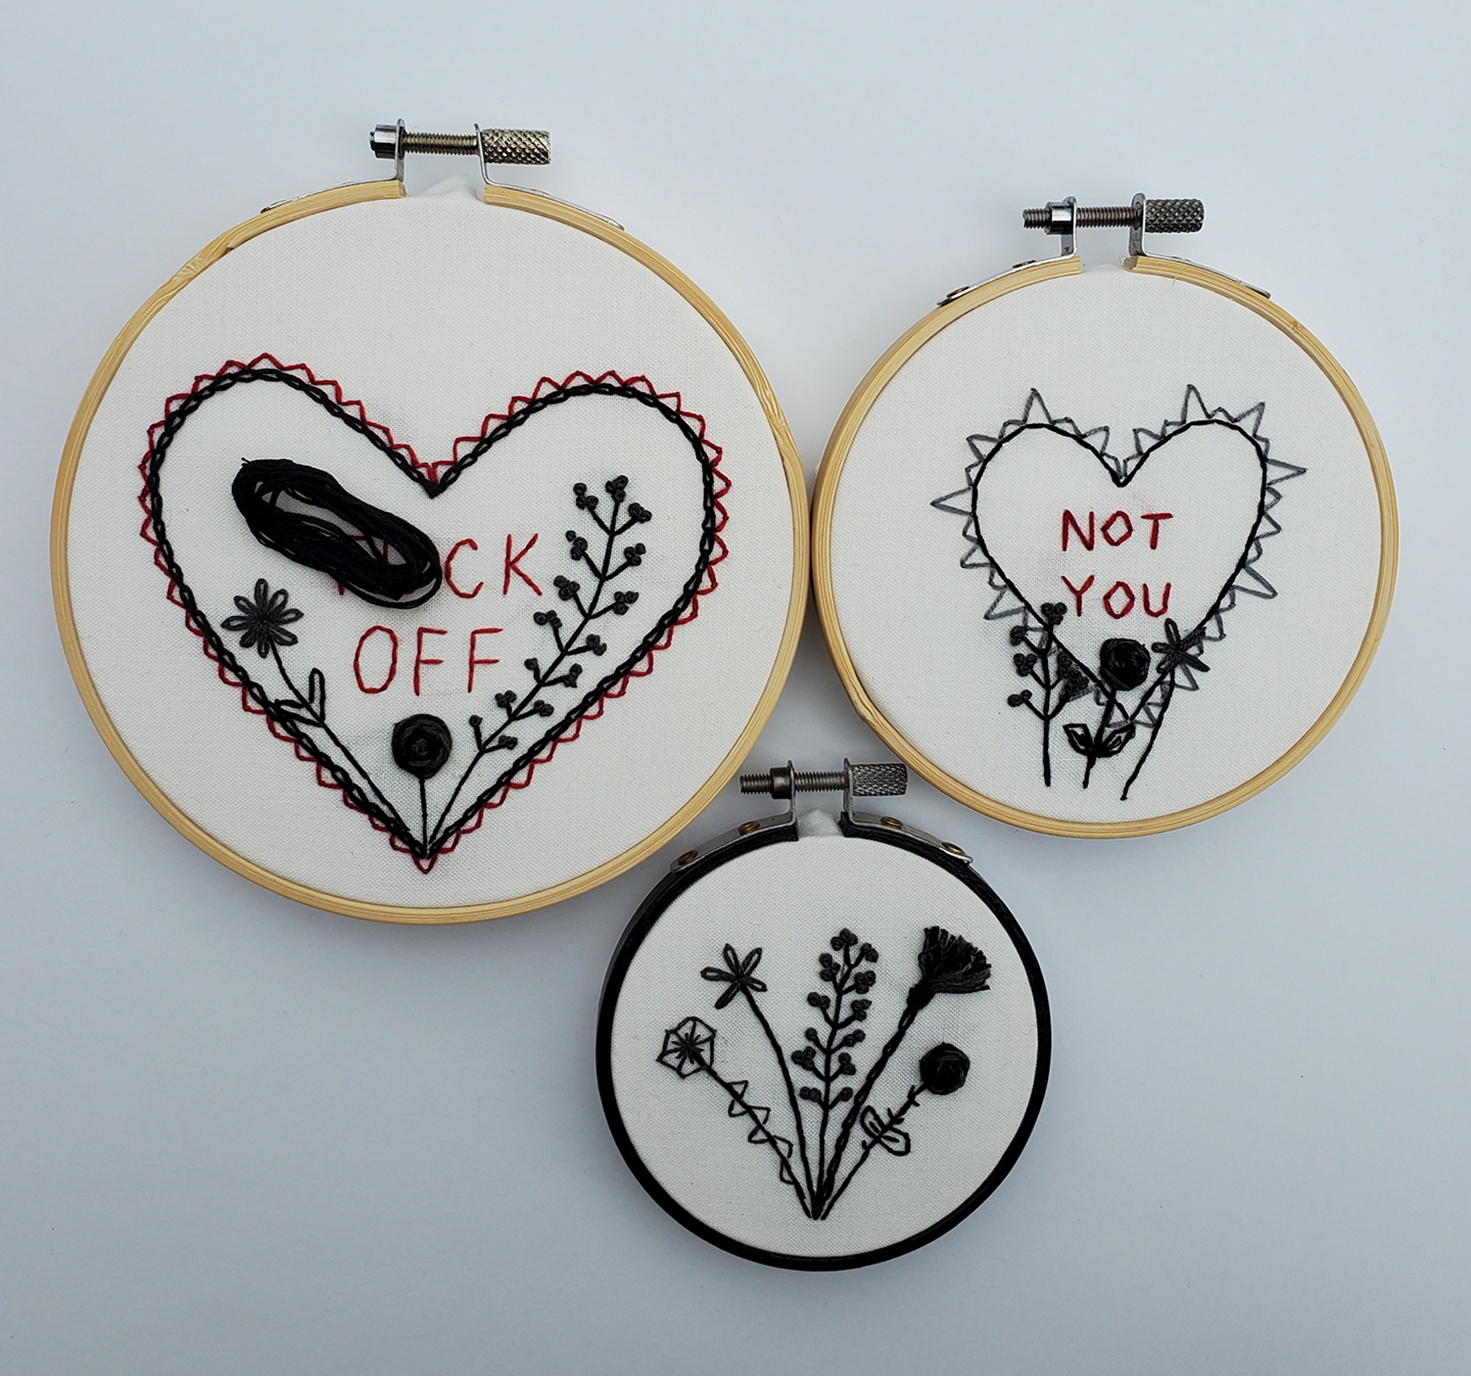 Image of three needlework hoops with hearts, fauna, "#*ck Off" and "Not You" embroidered on them.